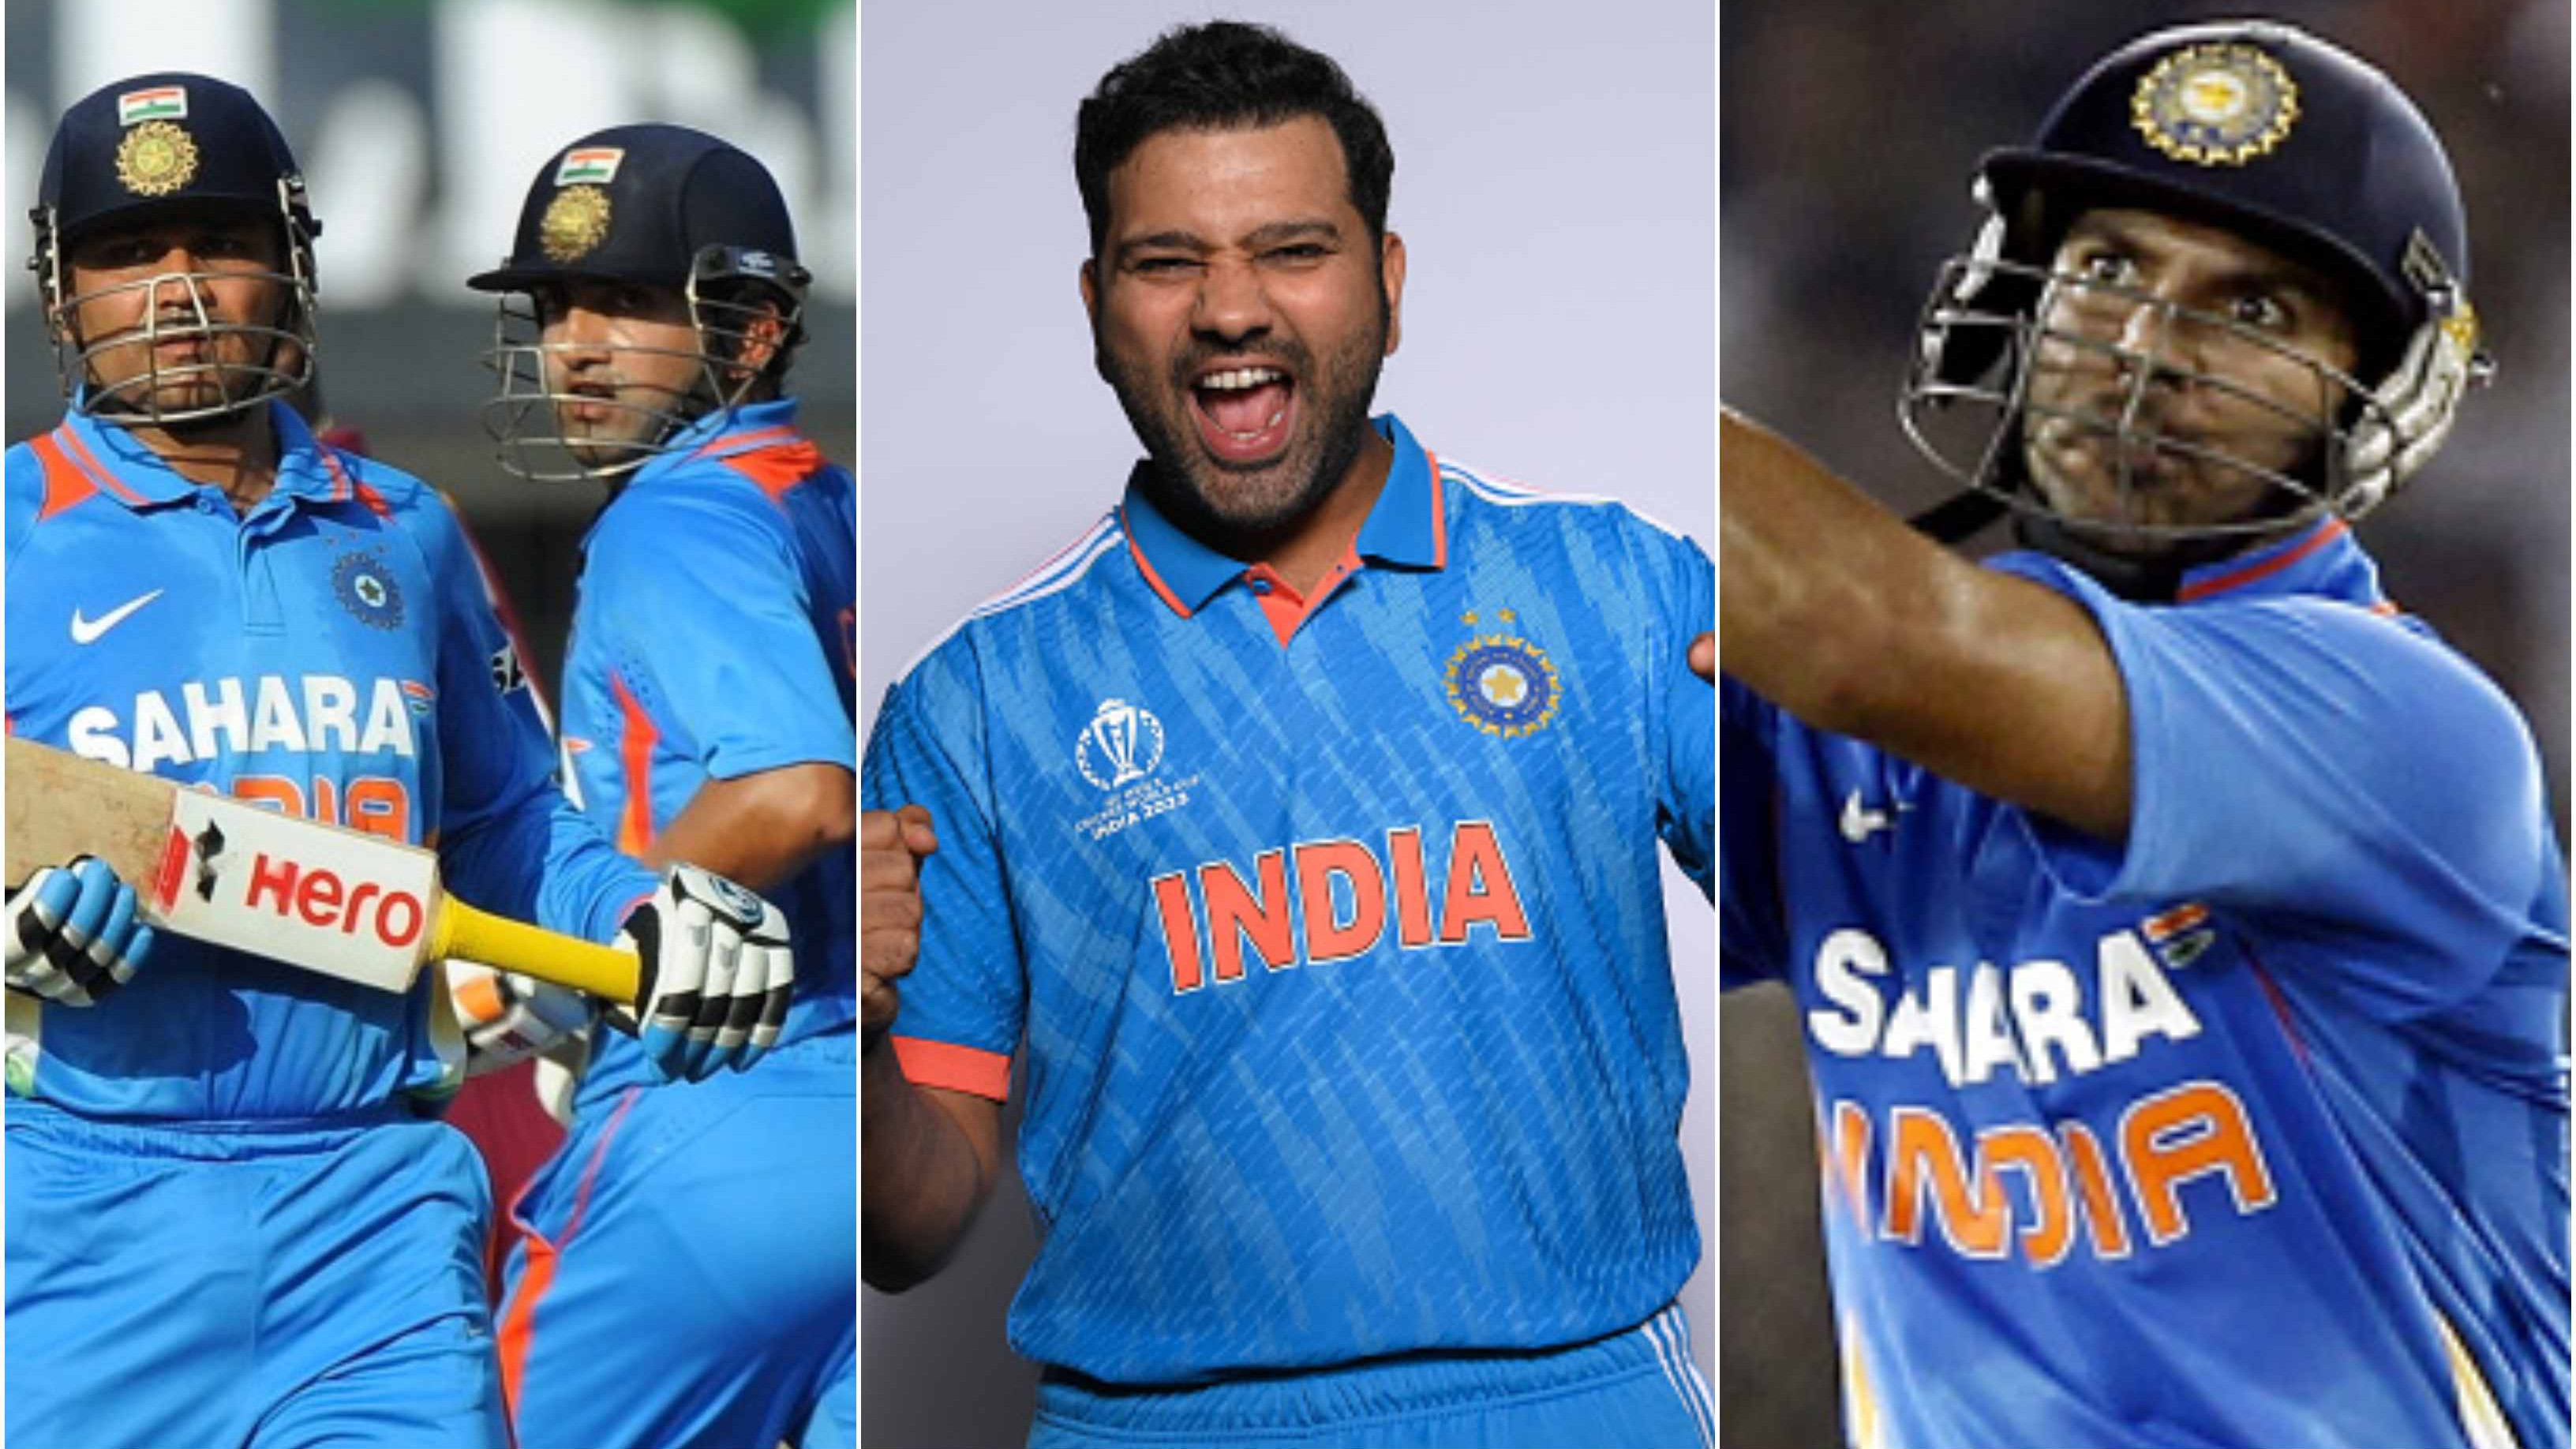 CWC 2023: Gambhir, Sehwag, Yuvraj missed out, Rohit Sharma ‘grateful’ to lead India at World Cup